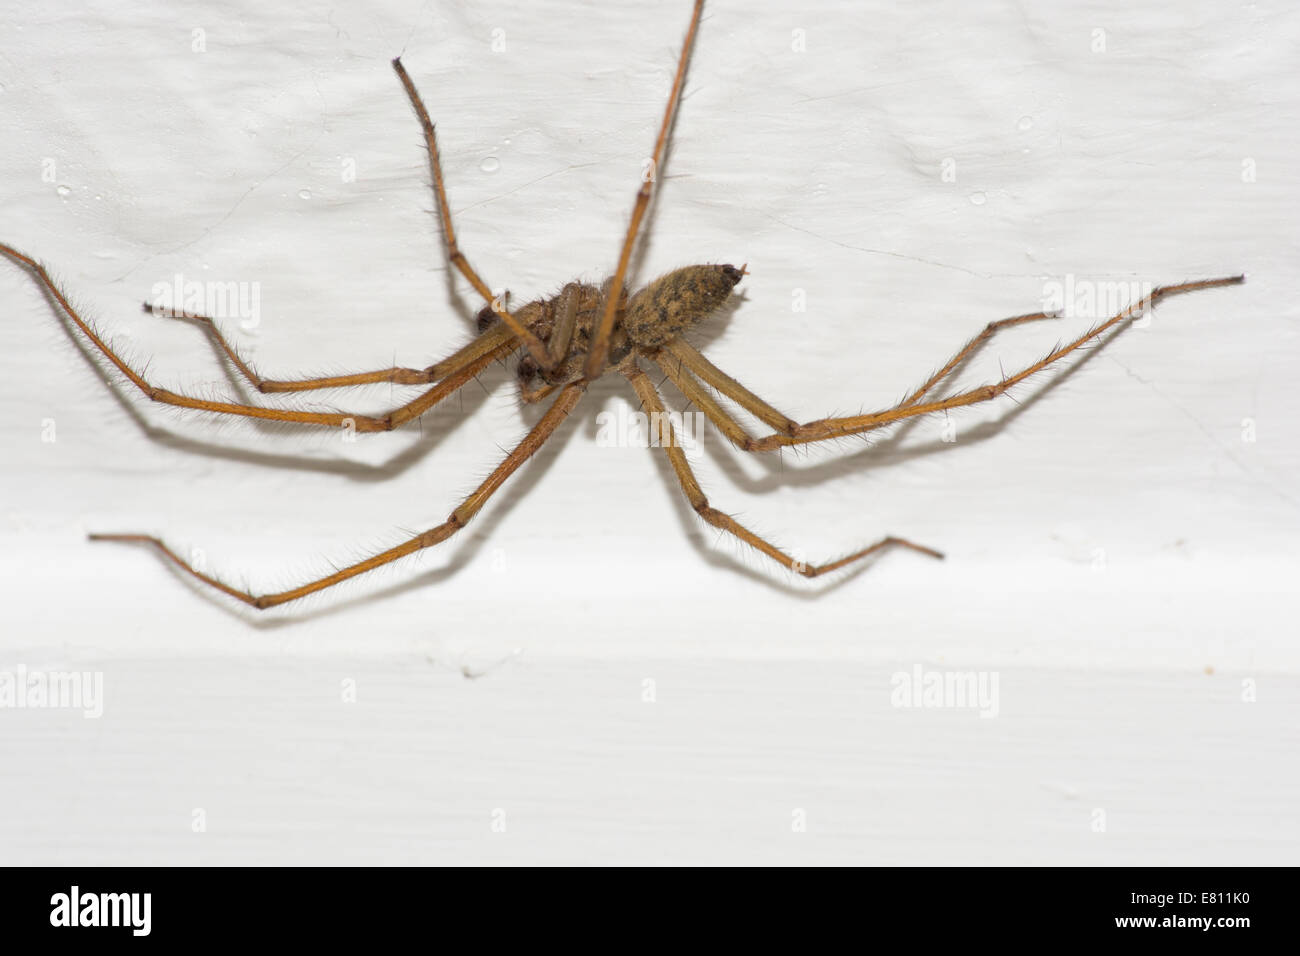 Close up of a common giant house spider on the ceiling Stock Photo